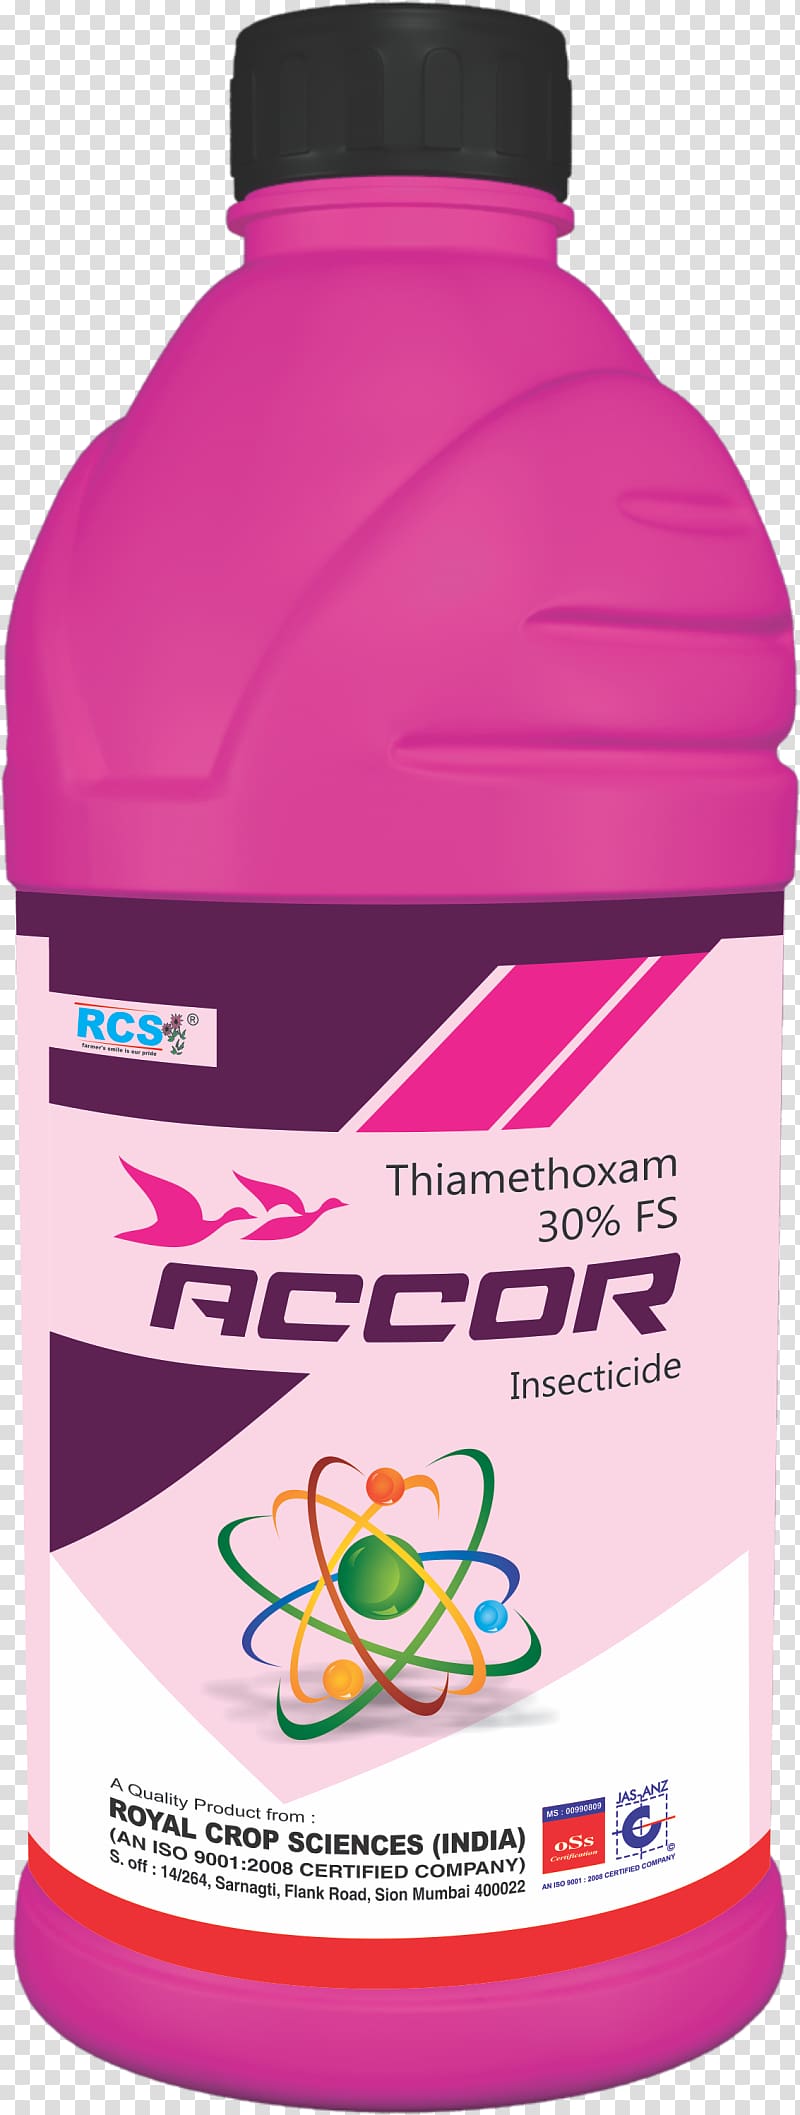 Thiamethoxam ROYAL CROP SCIENCE (INDIA) Rich Communication Services Rice, accor transparent background PNG clipart